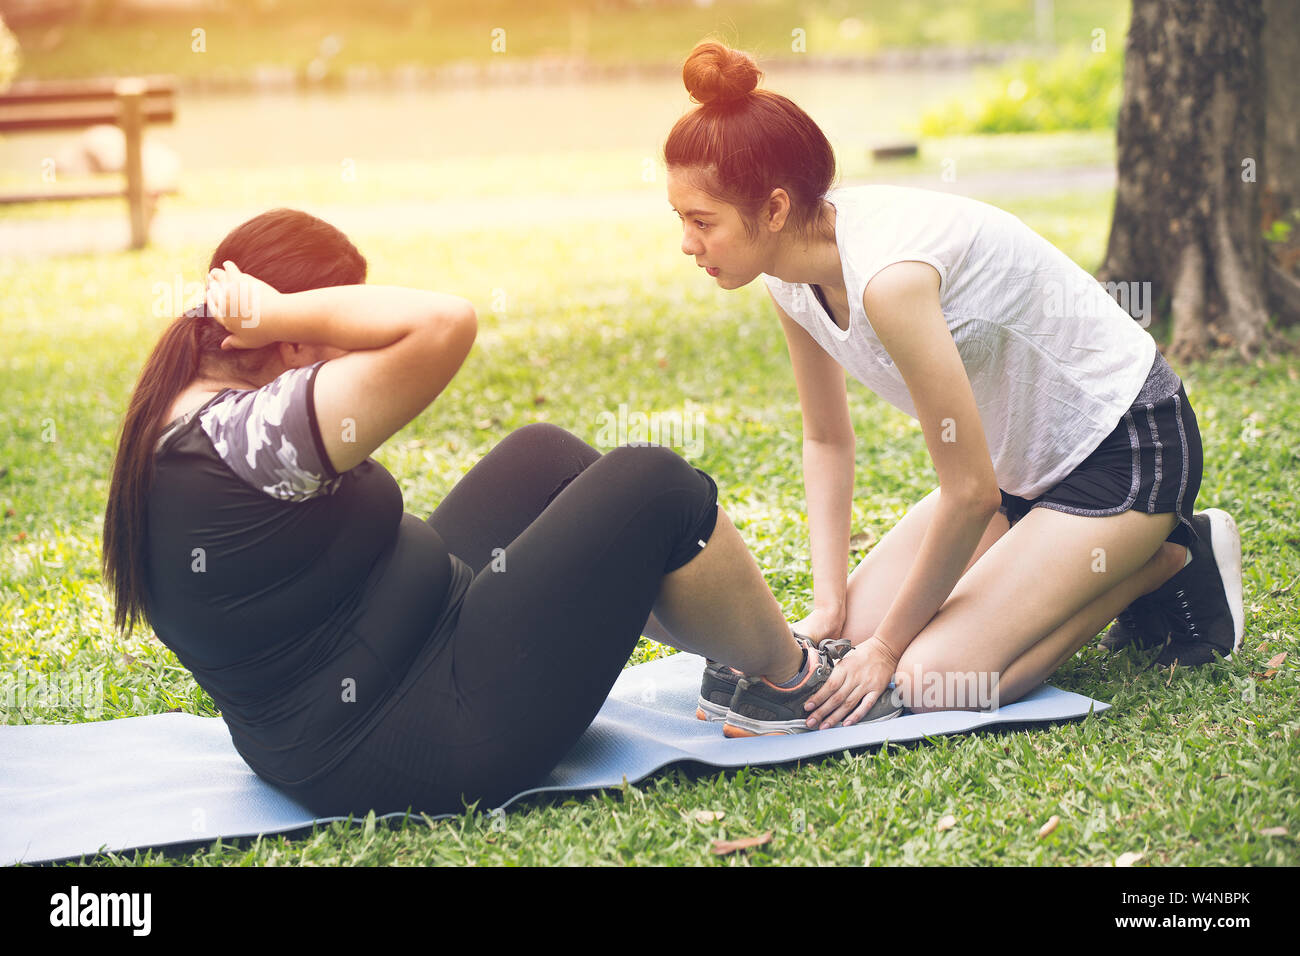 personal trainer coach teen help training fat girl friend to exercise diet for healthy outdoor in the park Stock Photo